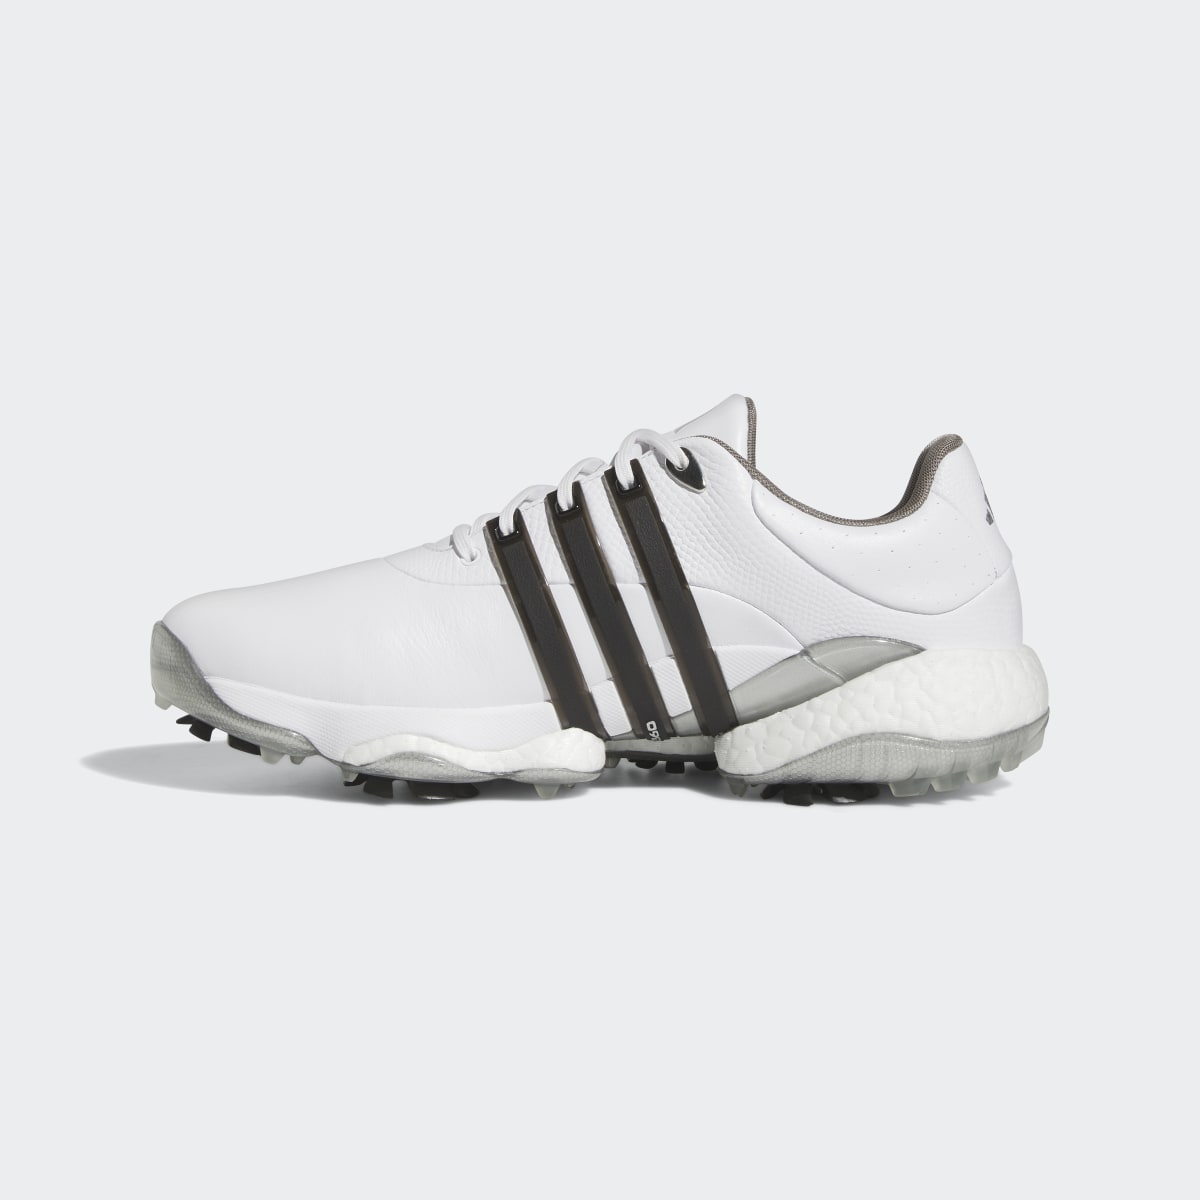 Adidas Tour360 22 BOOST Golf Shoes. 7